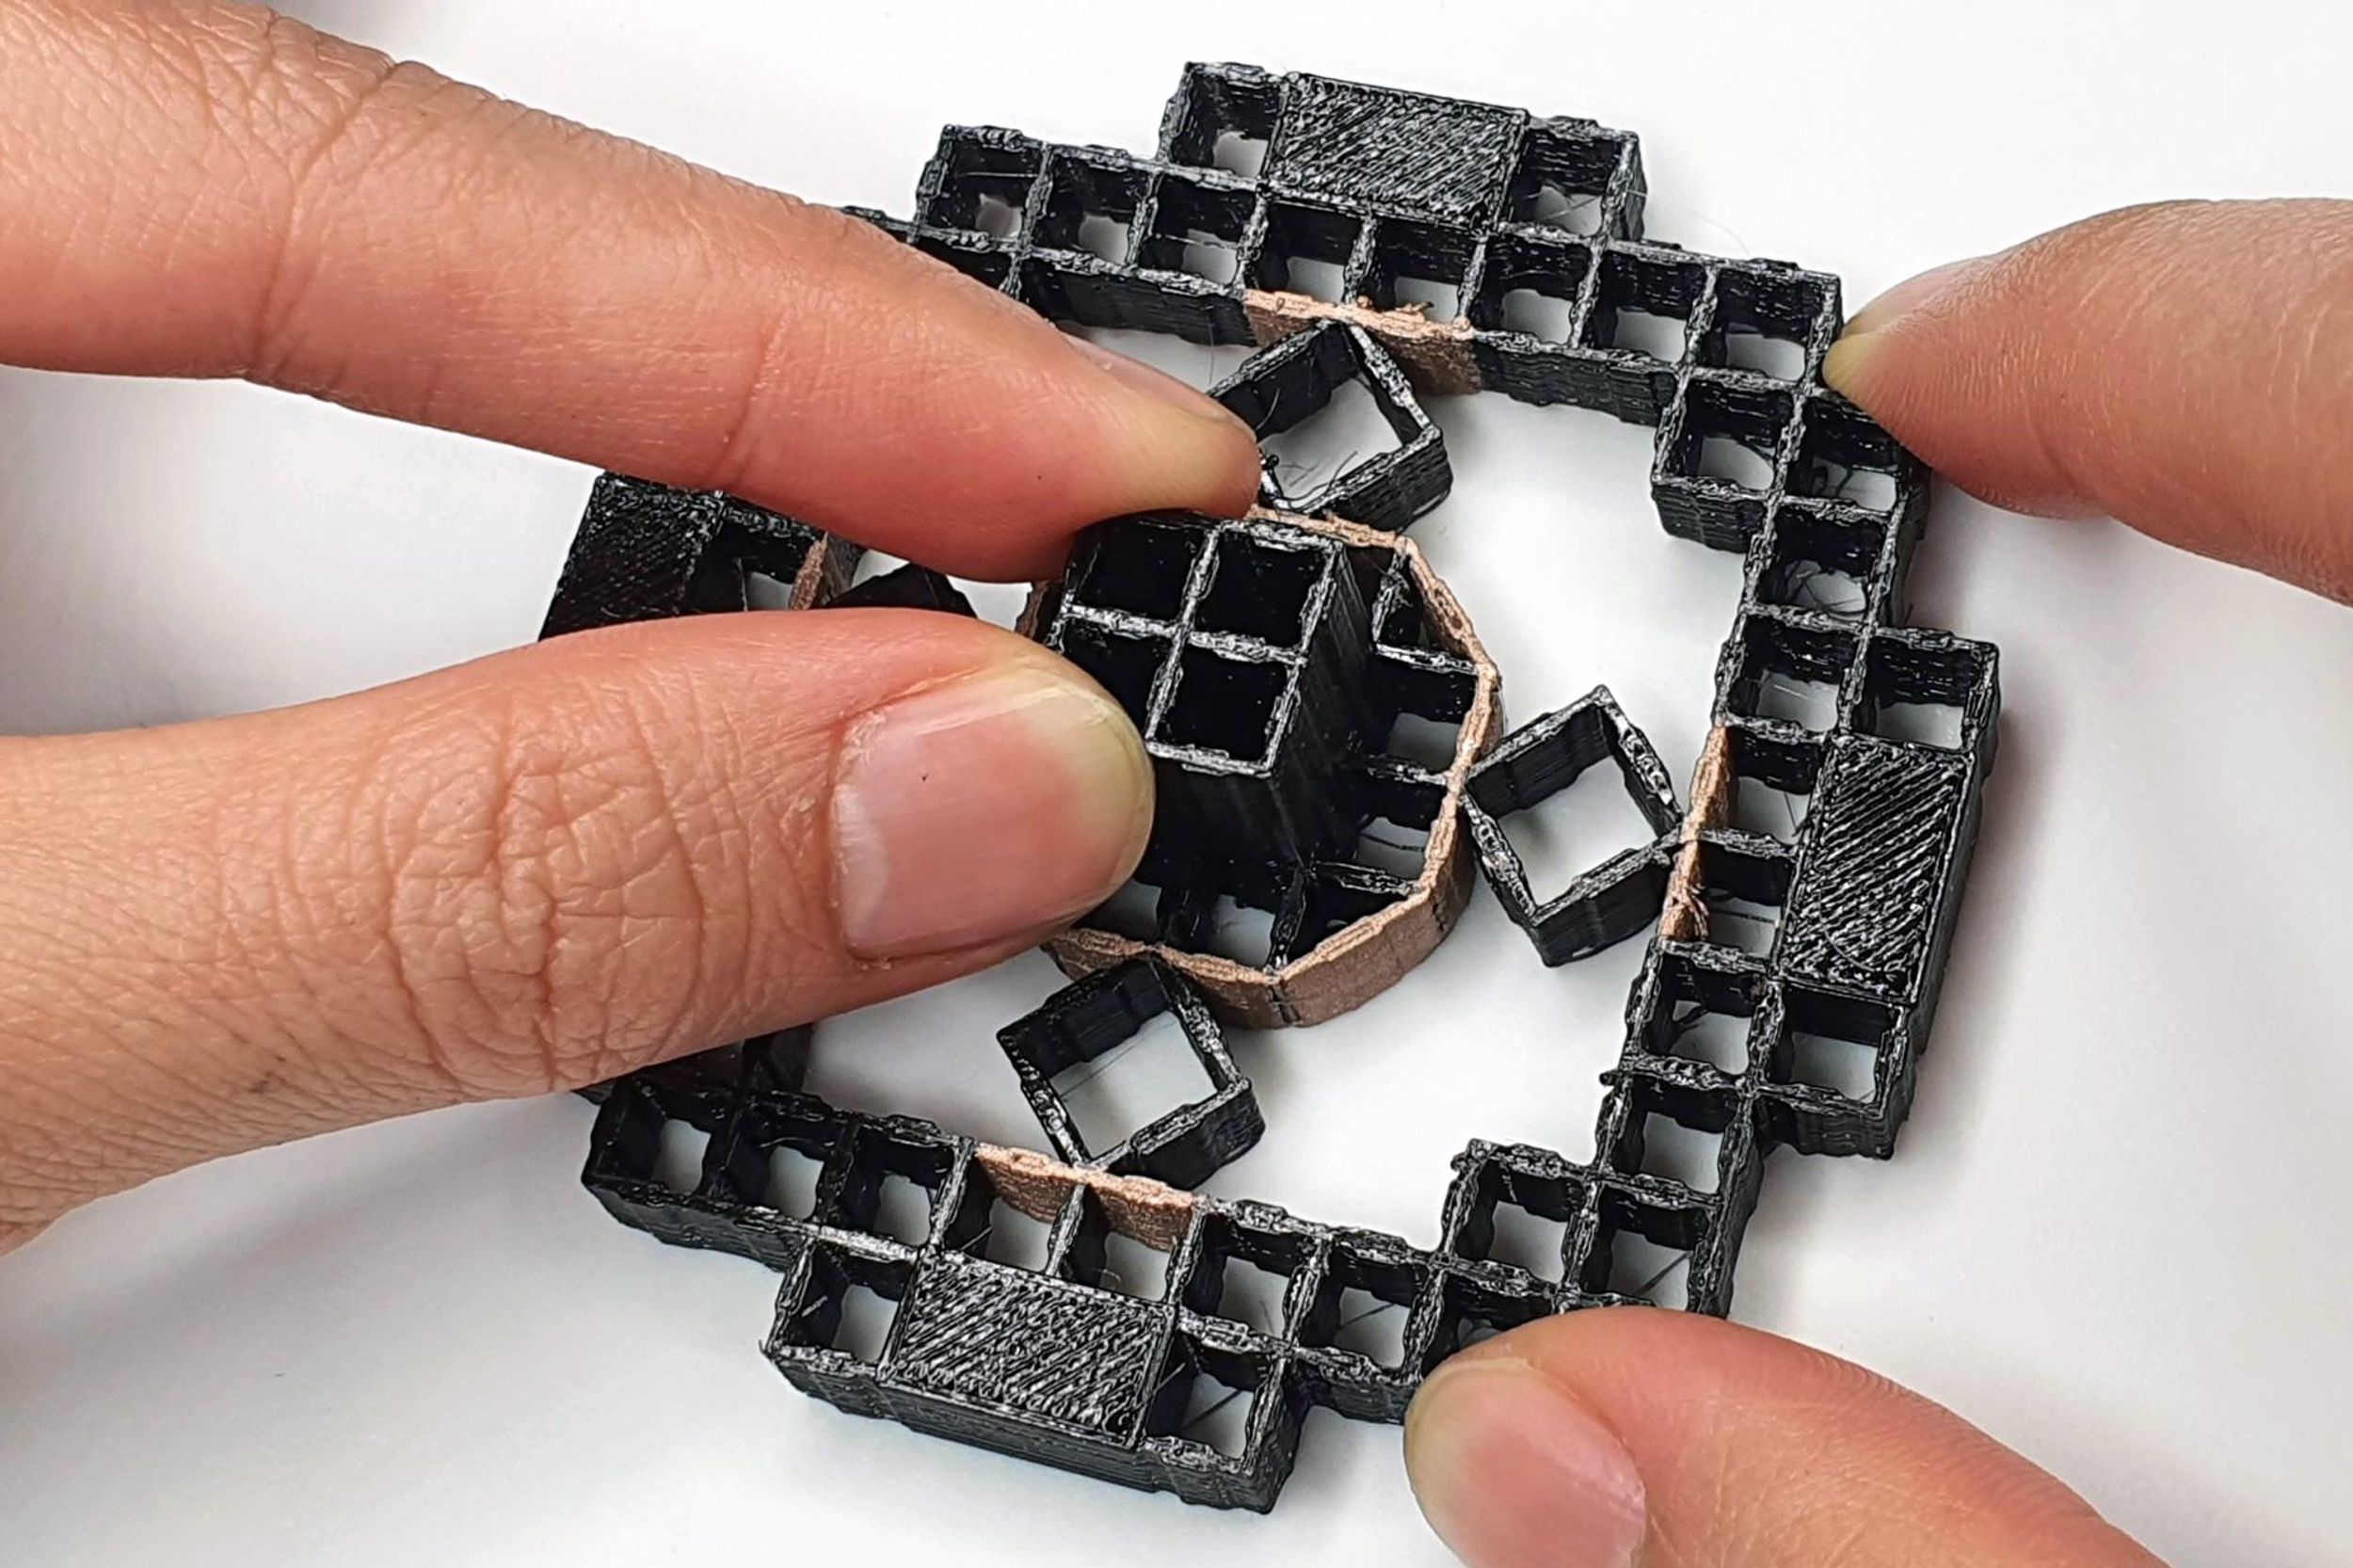 A black shiny structure composed of a grid of squares forming a larger square. The center is a gold circular piece with more squares, and 4 squares on the top, bottom, left, and right. 4 fingers are holding it to show the scale being about a finger length.